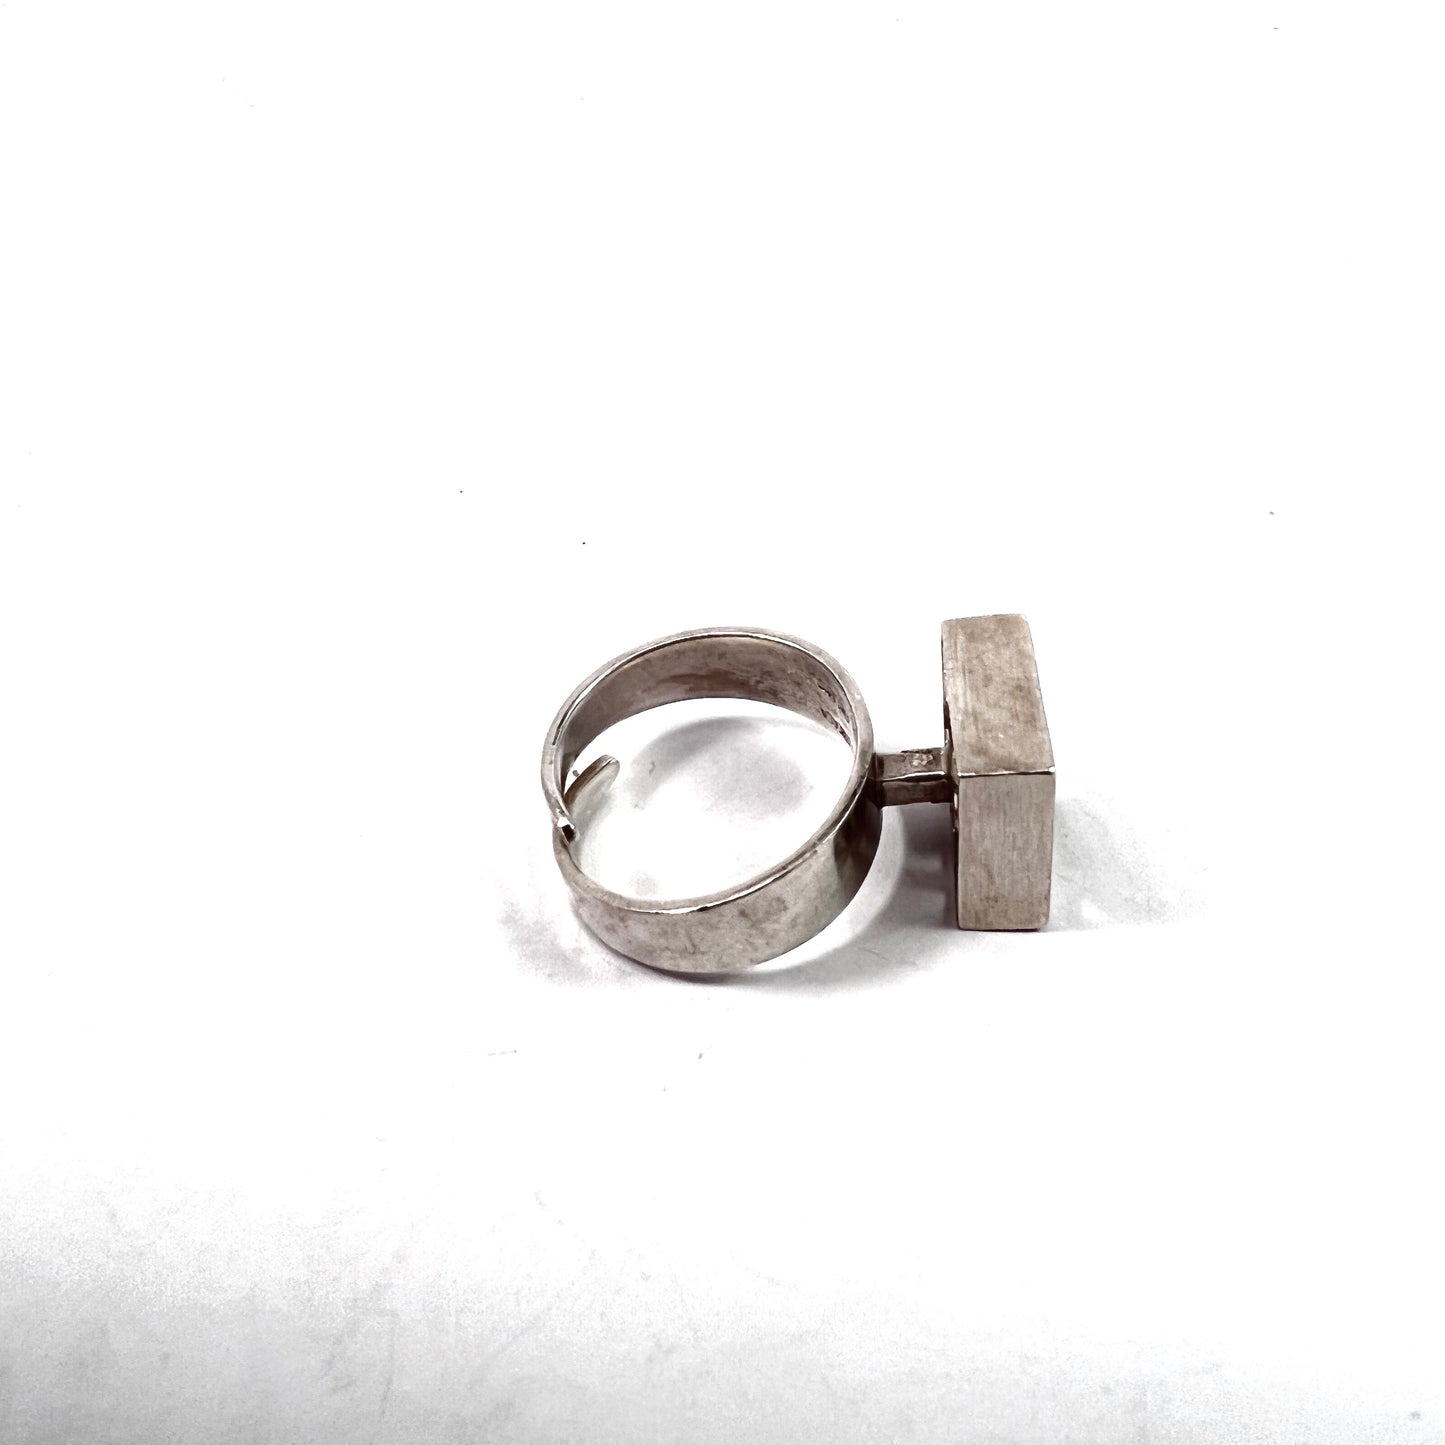 Esa Lukala, Finland 1970s. Solid Silver Ring. Signed.